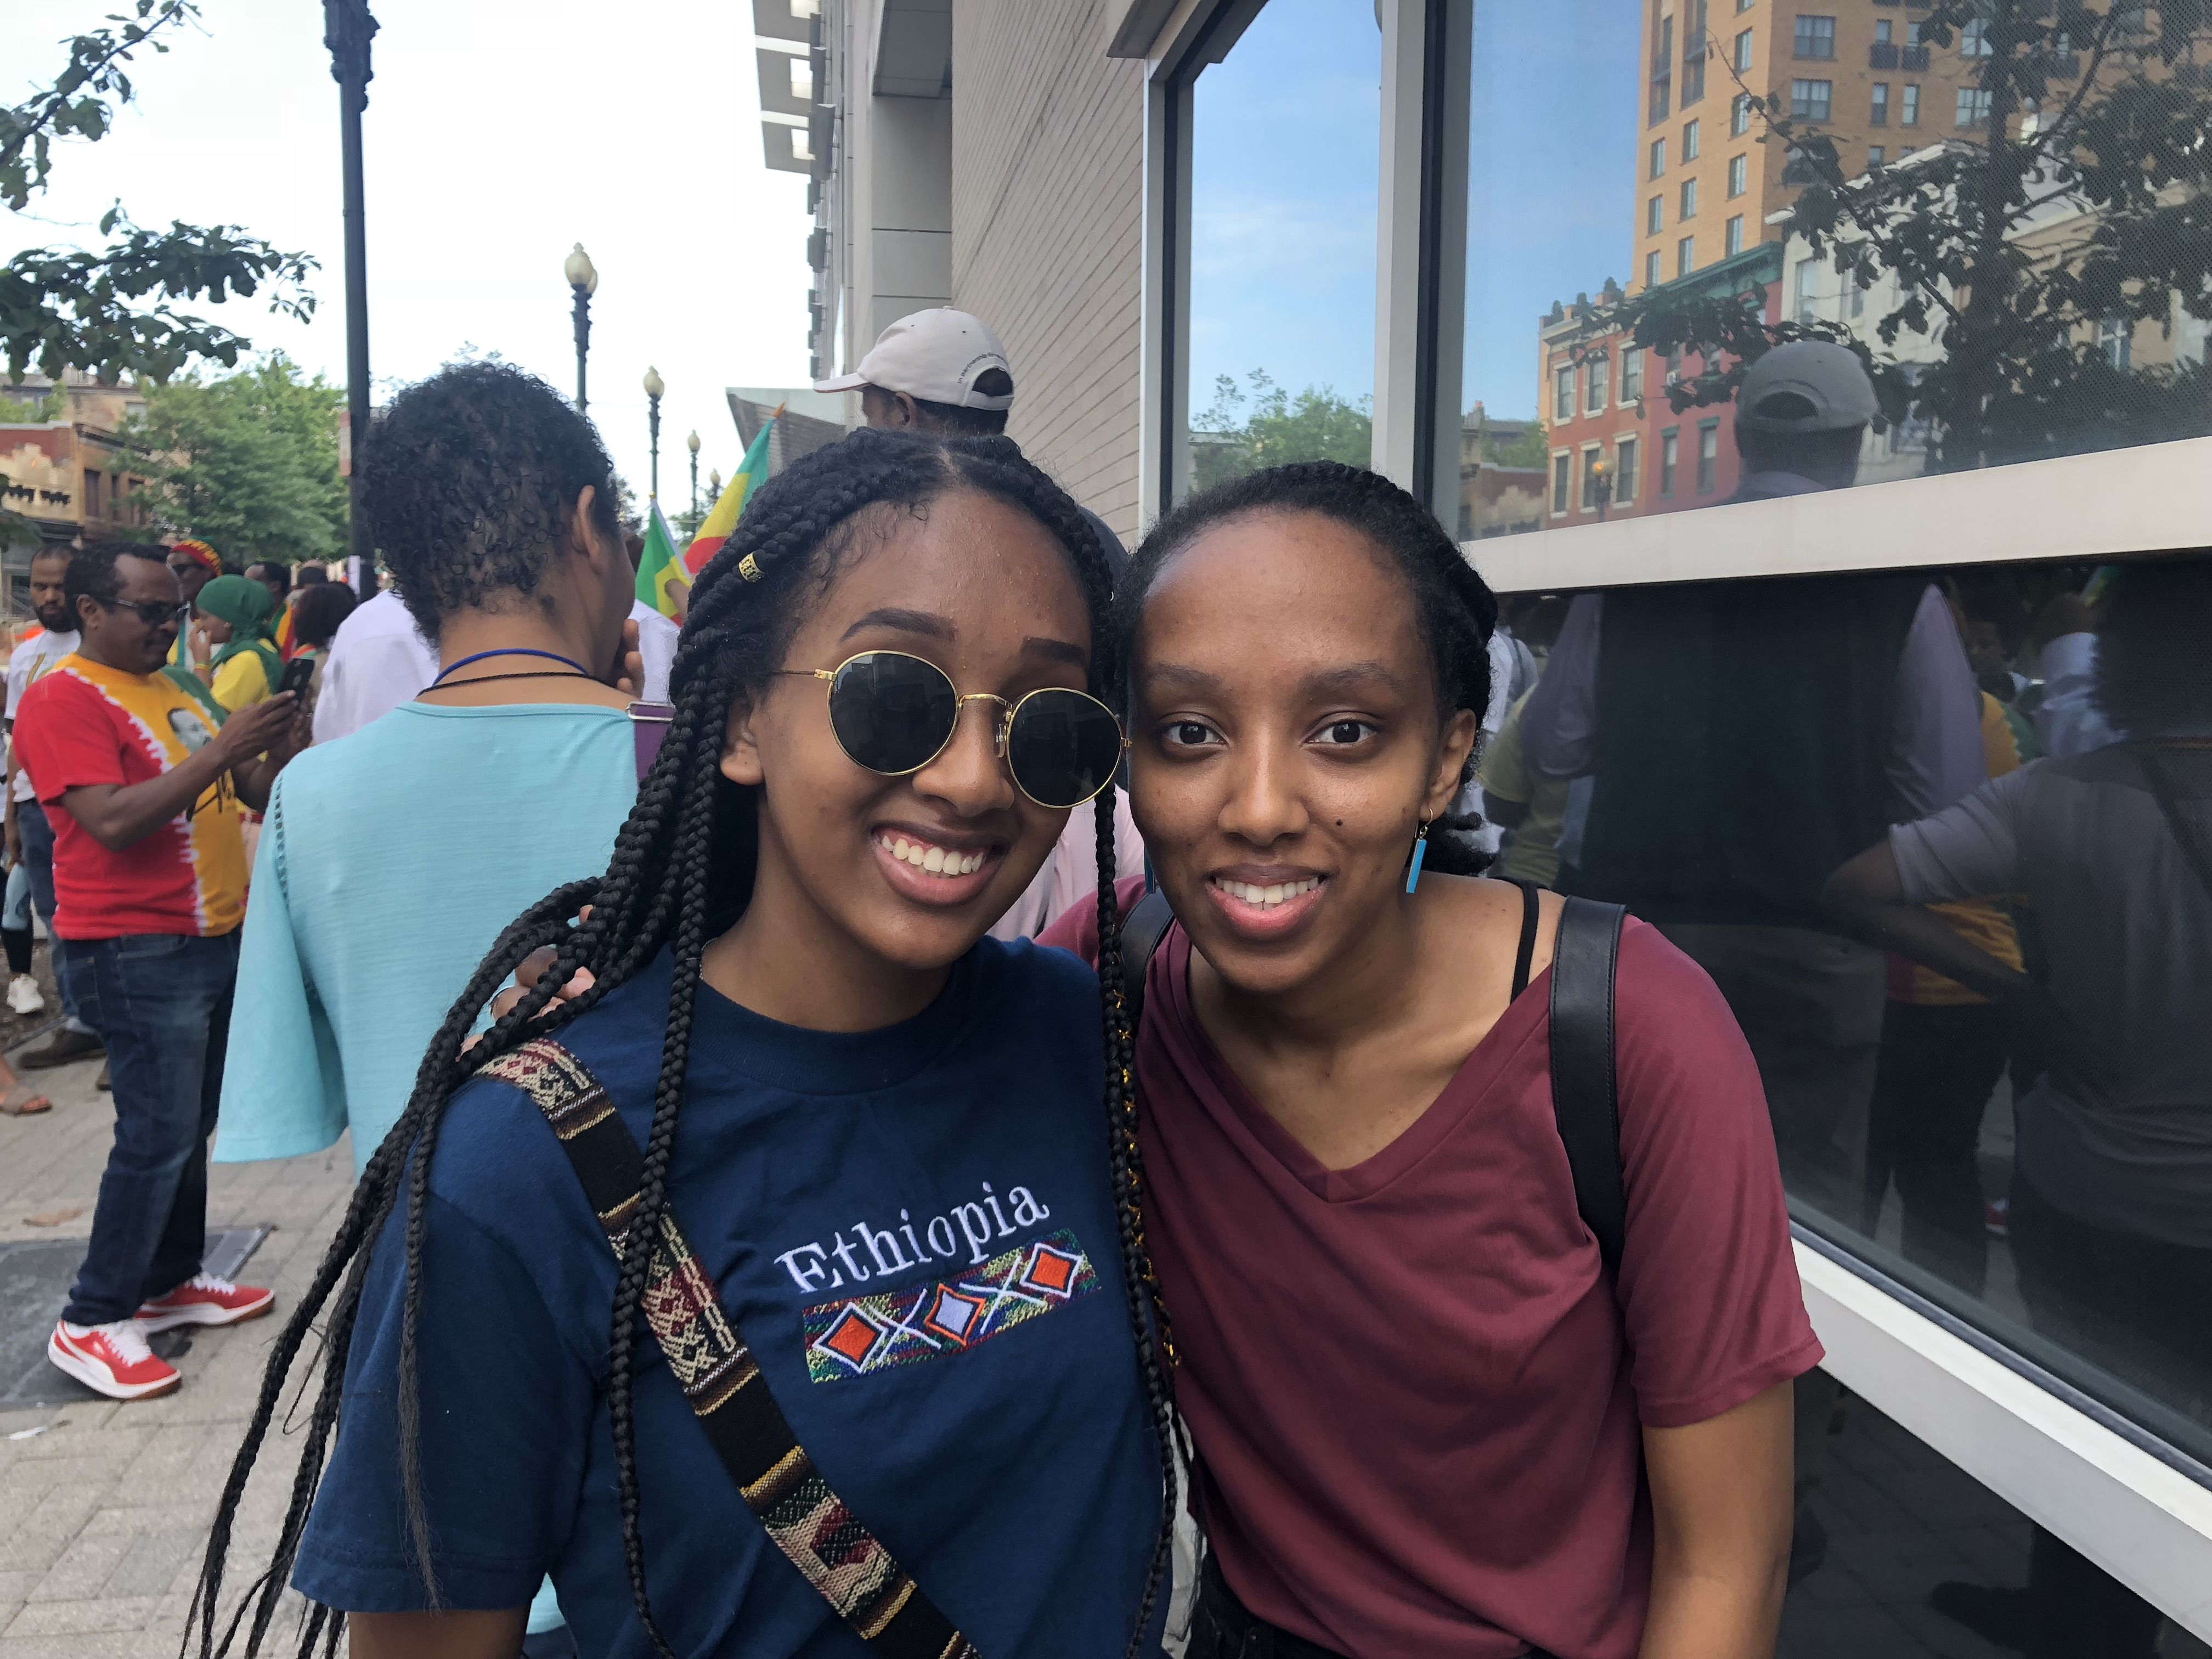 Naomi Bergena (left) and her friend are both first generation Ethiopian-Americans who came to support Abiy on July 28. The recent changes in Ethiopia have inspired her to become more engaged with her Ethiopian identity. Image by Claire Potter. United States, 2018. 